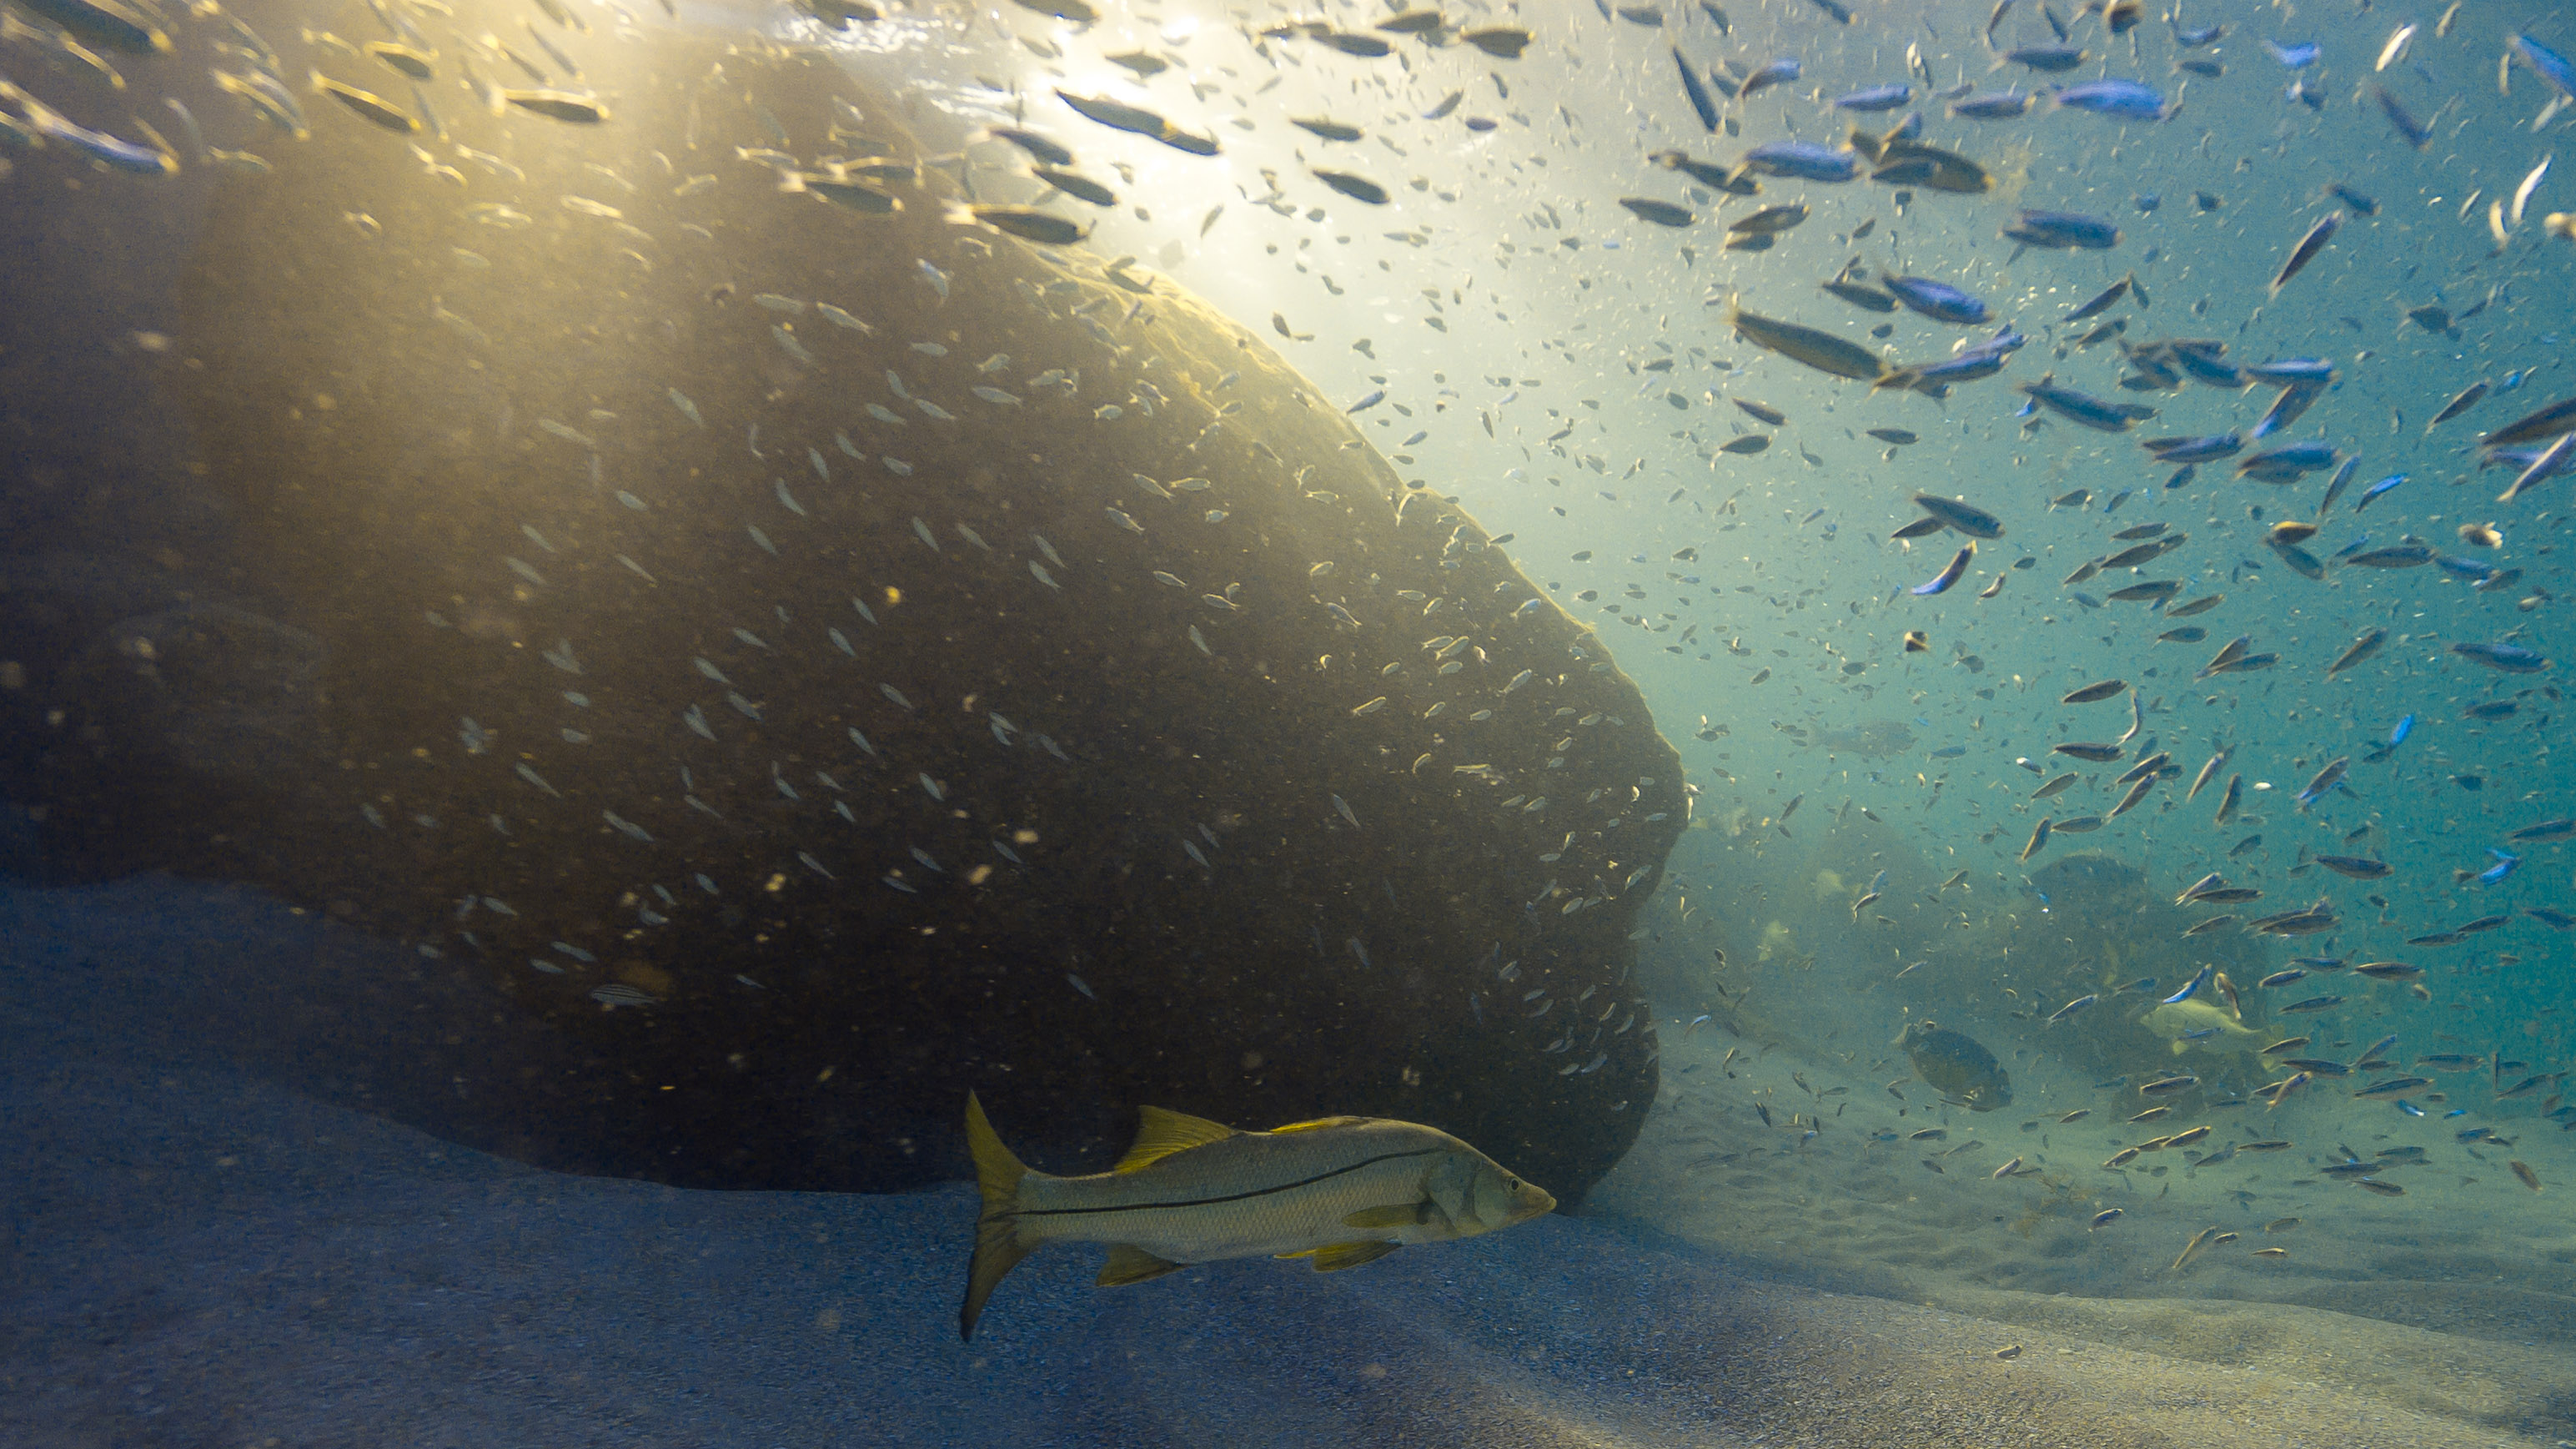 A common snook swims beside jetty rocks as forage fish, including pilchards, feed on sun-nurtured microscopic plants. These small fish, rich sources of omega-3 fatty-acids and proteins, essentially transfer the sun's energy into a form that predators can use to grow and reproduce. According to a 2012 study, baitfish are twice as valuable when left in the water as when caught commercially. 